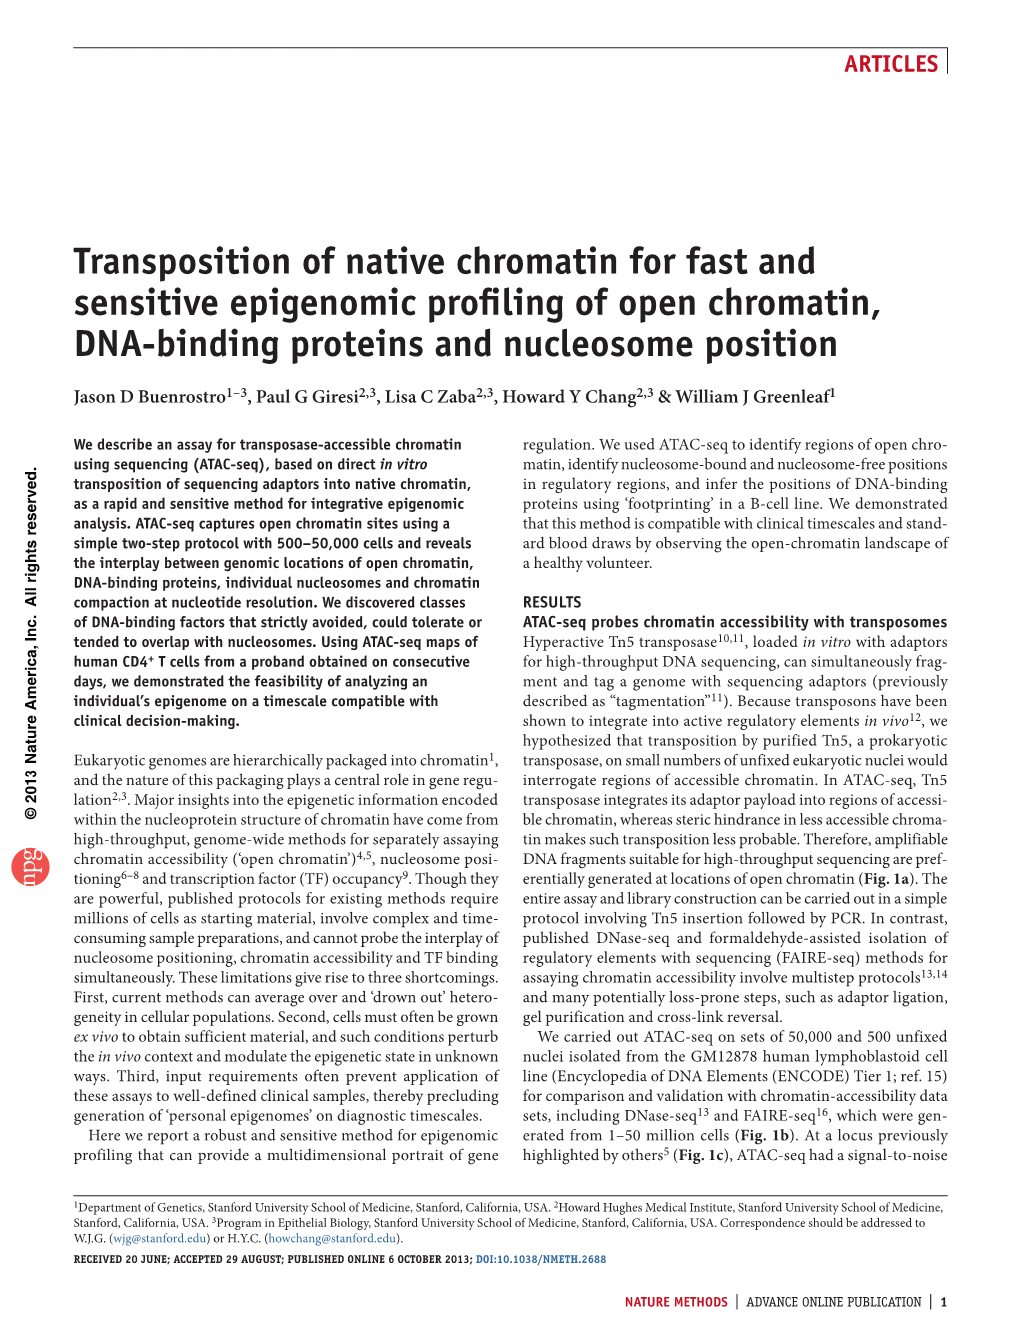 Transposition of Native Chromatin for Fast and Sensitive Epigenomic Profiling of Open Chromatin, DNA-Binding Proteins and Nucleo